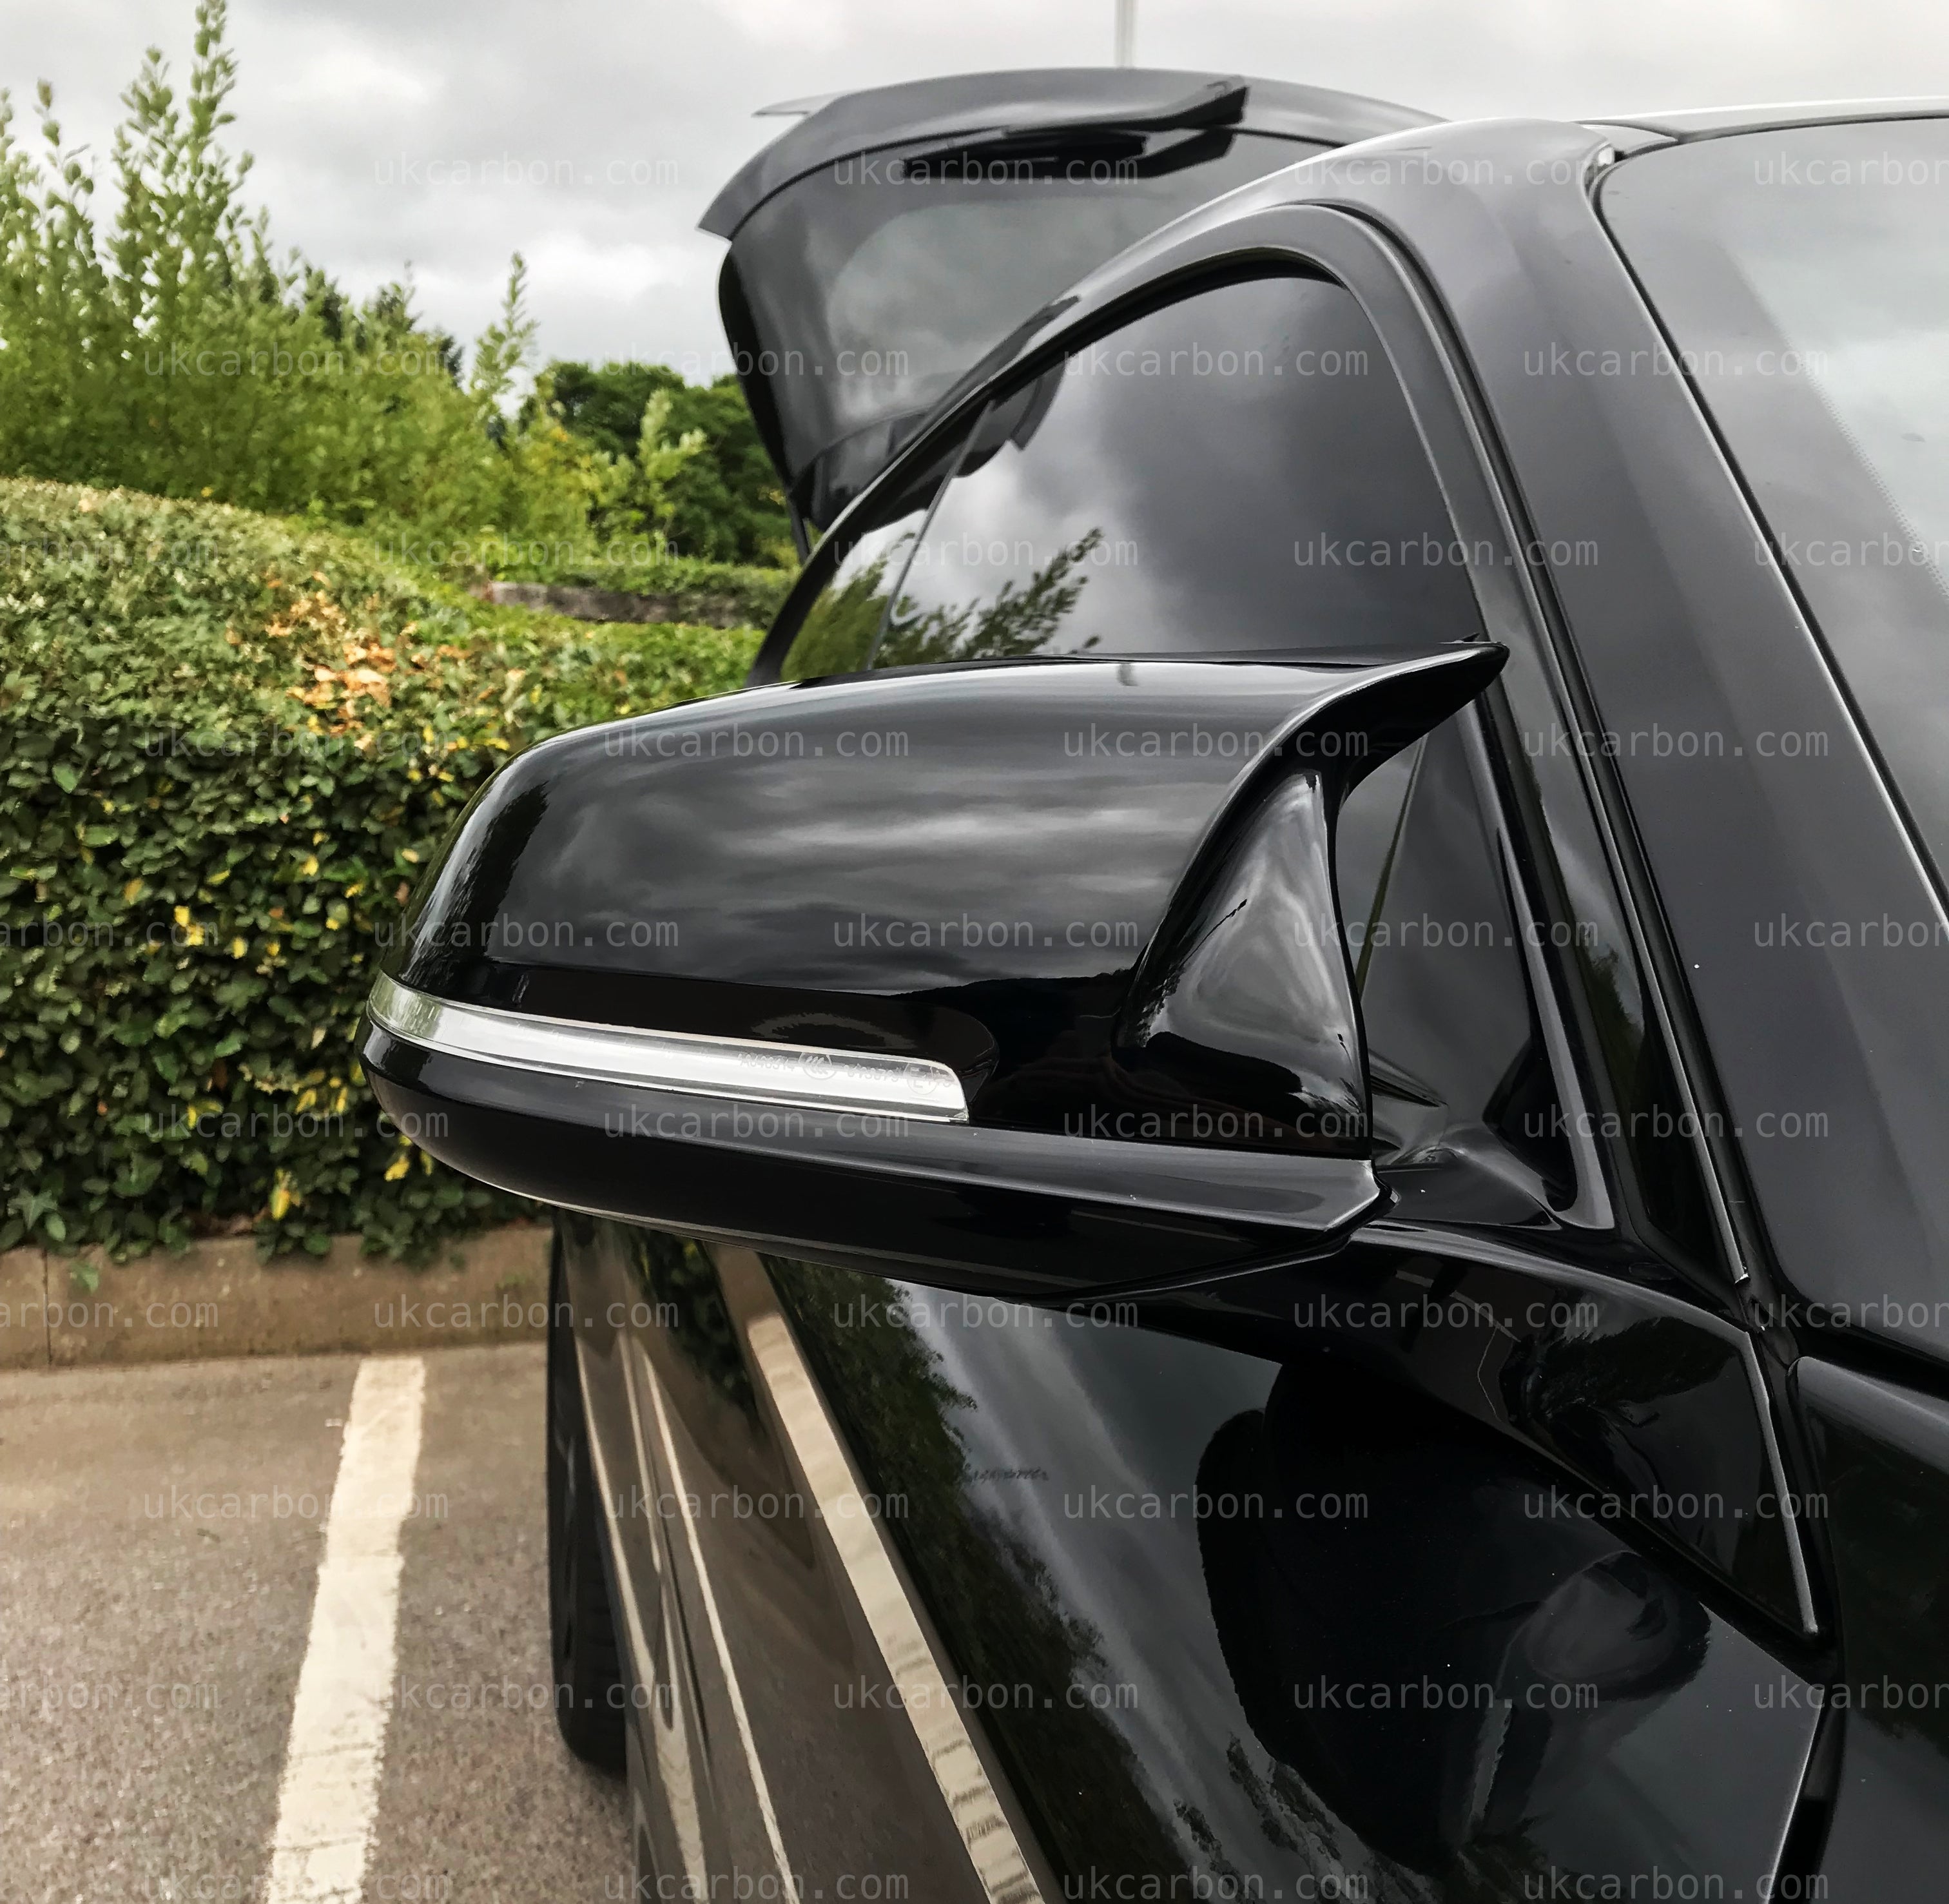 BMW 1 Series Gloss Black M Style Wing Mirror Cover Replacements F20 by UKCarbon